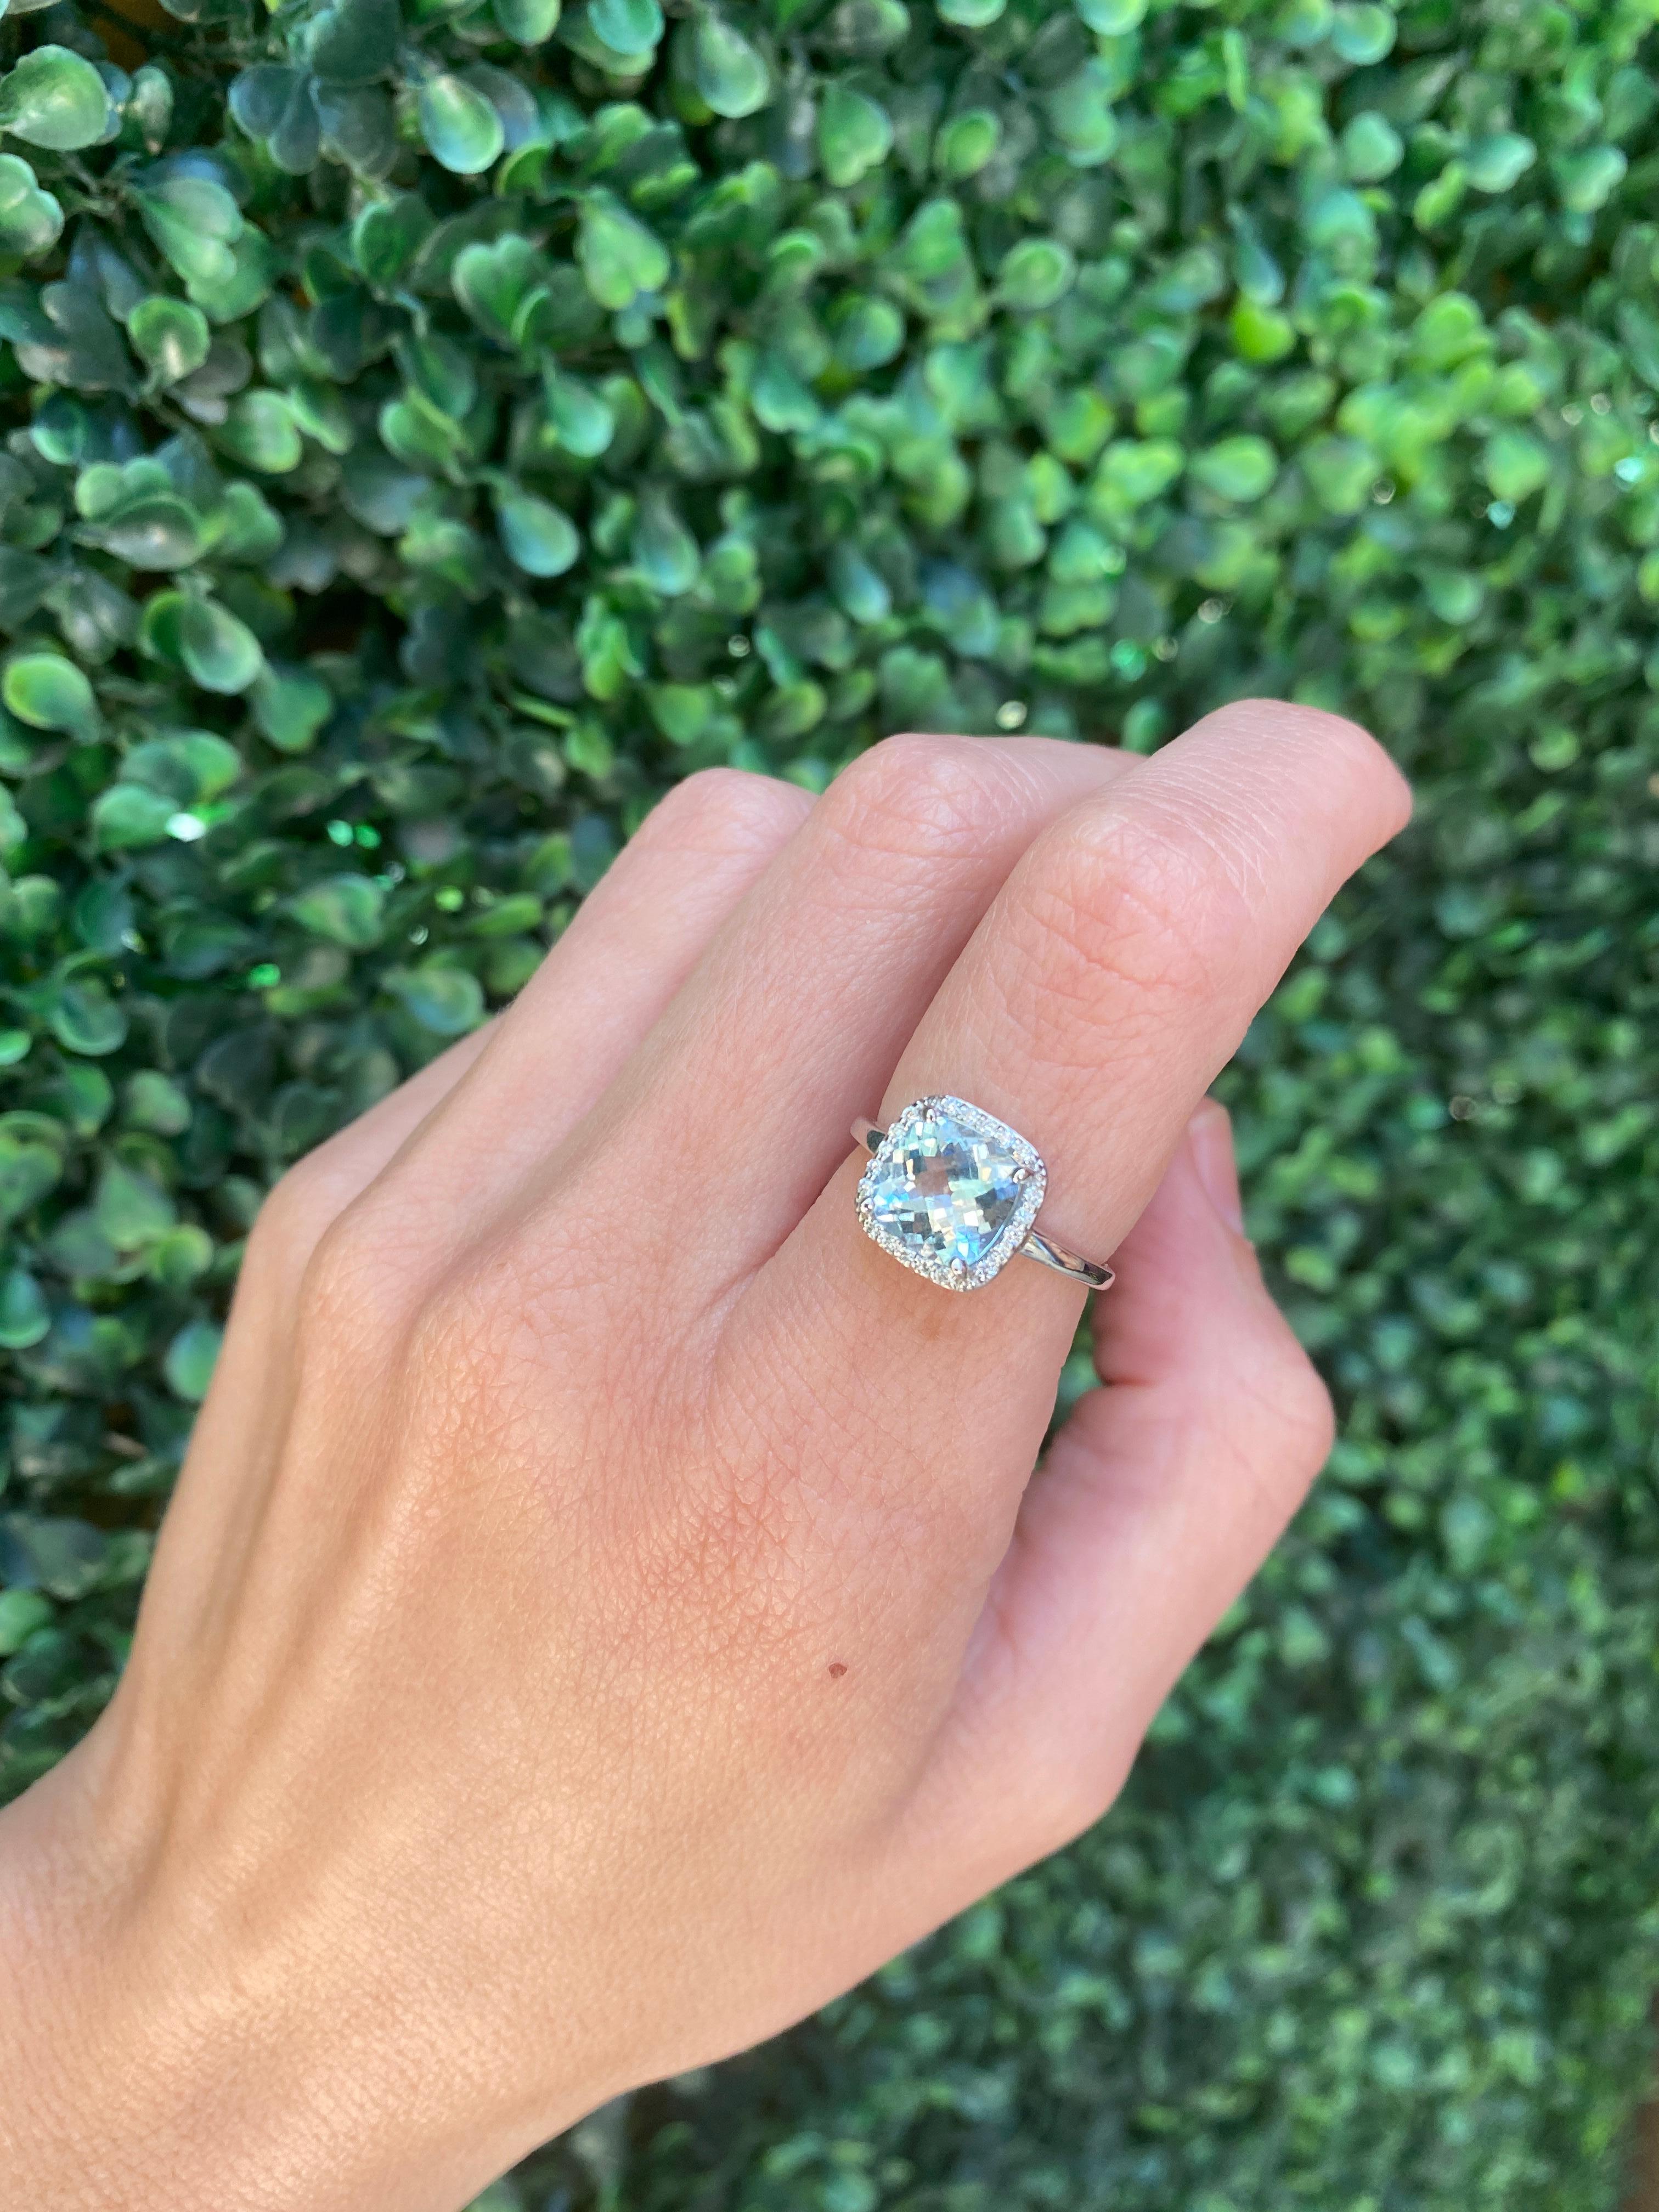 This beautiful ring features a 1.85 carat aquamarine accented by a diamond halo with a total carat weight of 0.13 carats. This ring is a size 6.75 but can be resized upon request. 
Measurements: Aquamarine measures approximately 8.20mm x 8.20mm